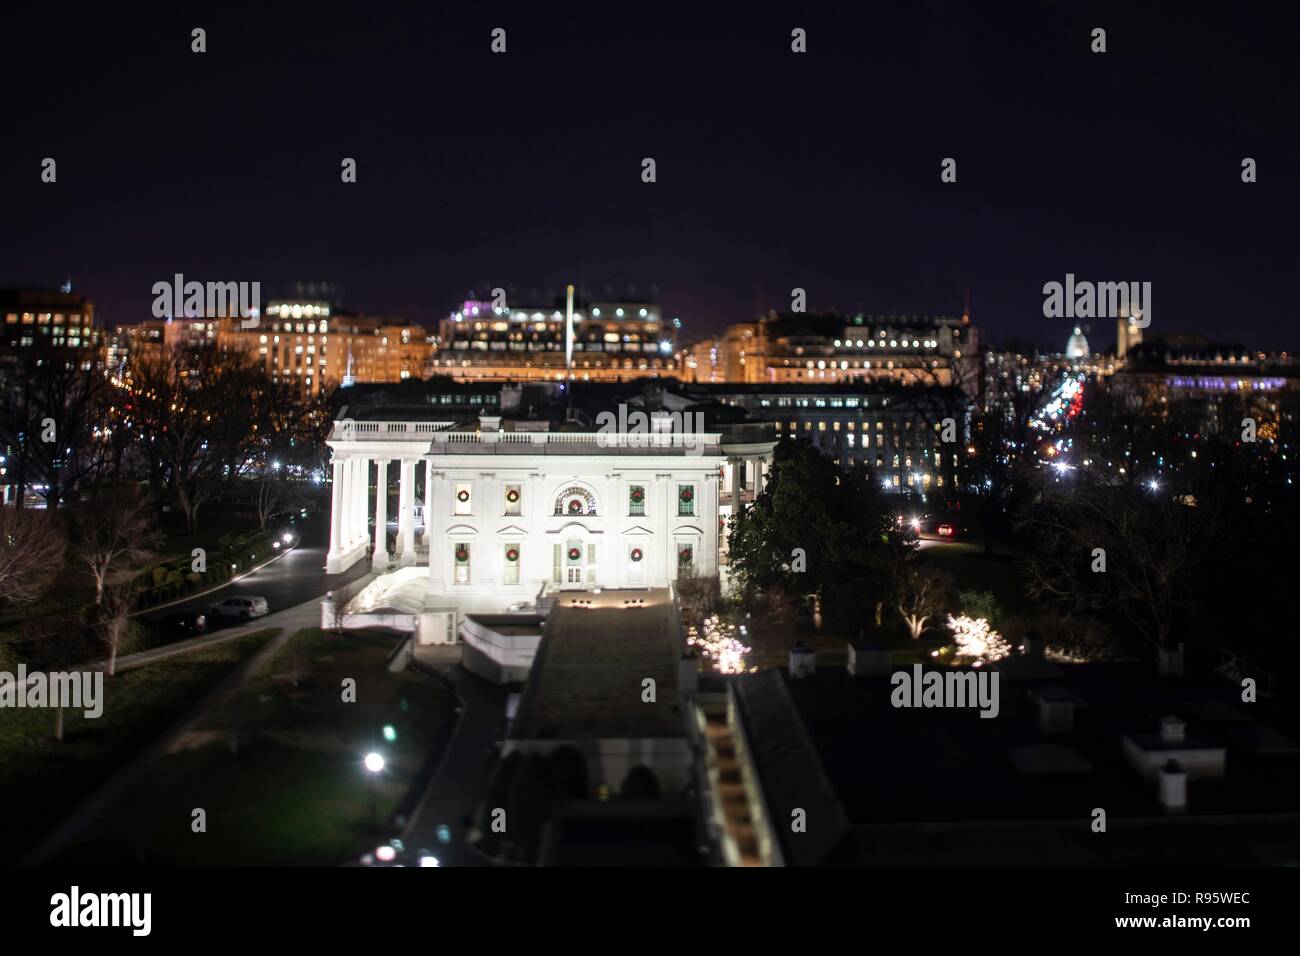 The west facade of the White House decorated for Christmas and lighted at night December 12, 2018 in Washington, DC. Stock Photo